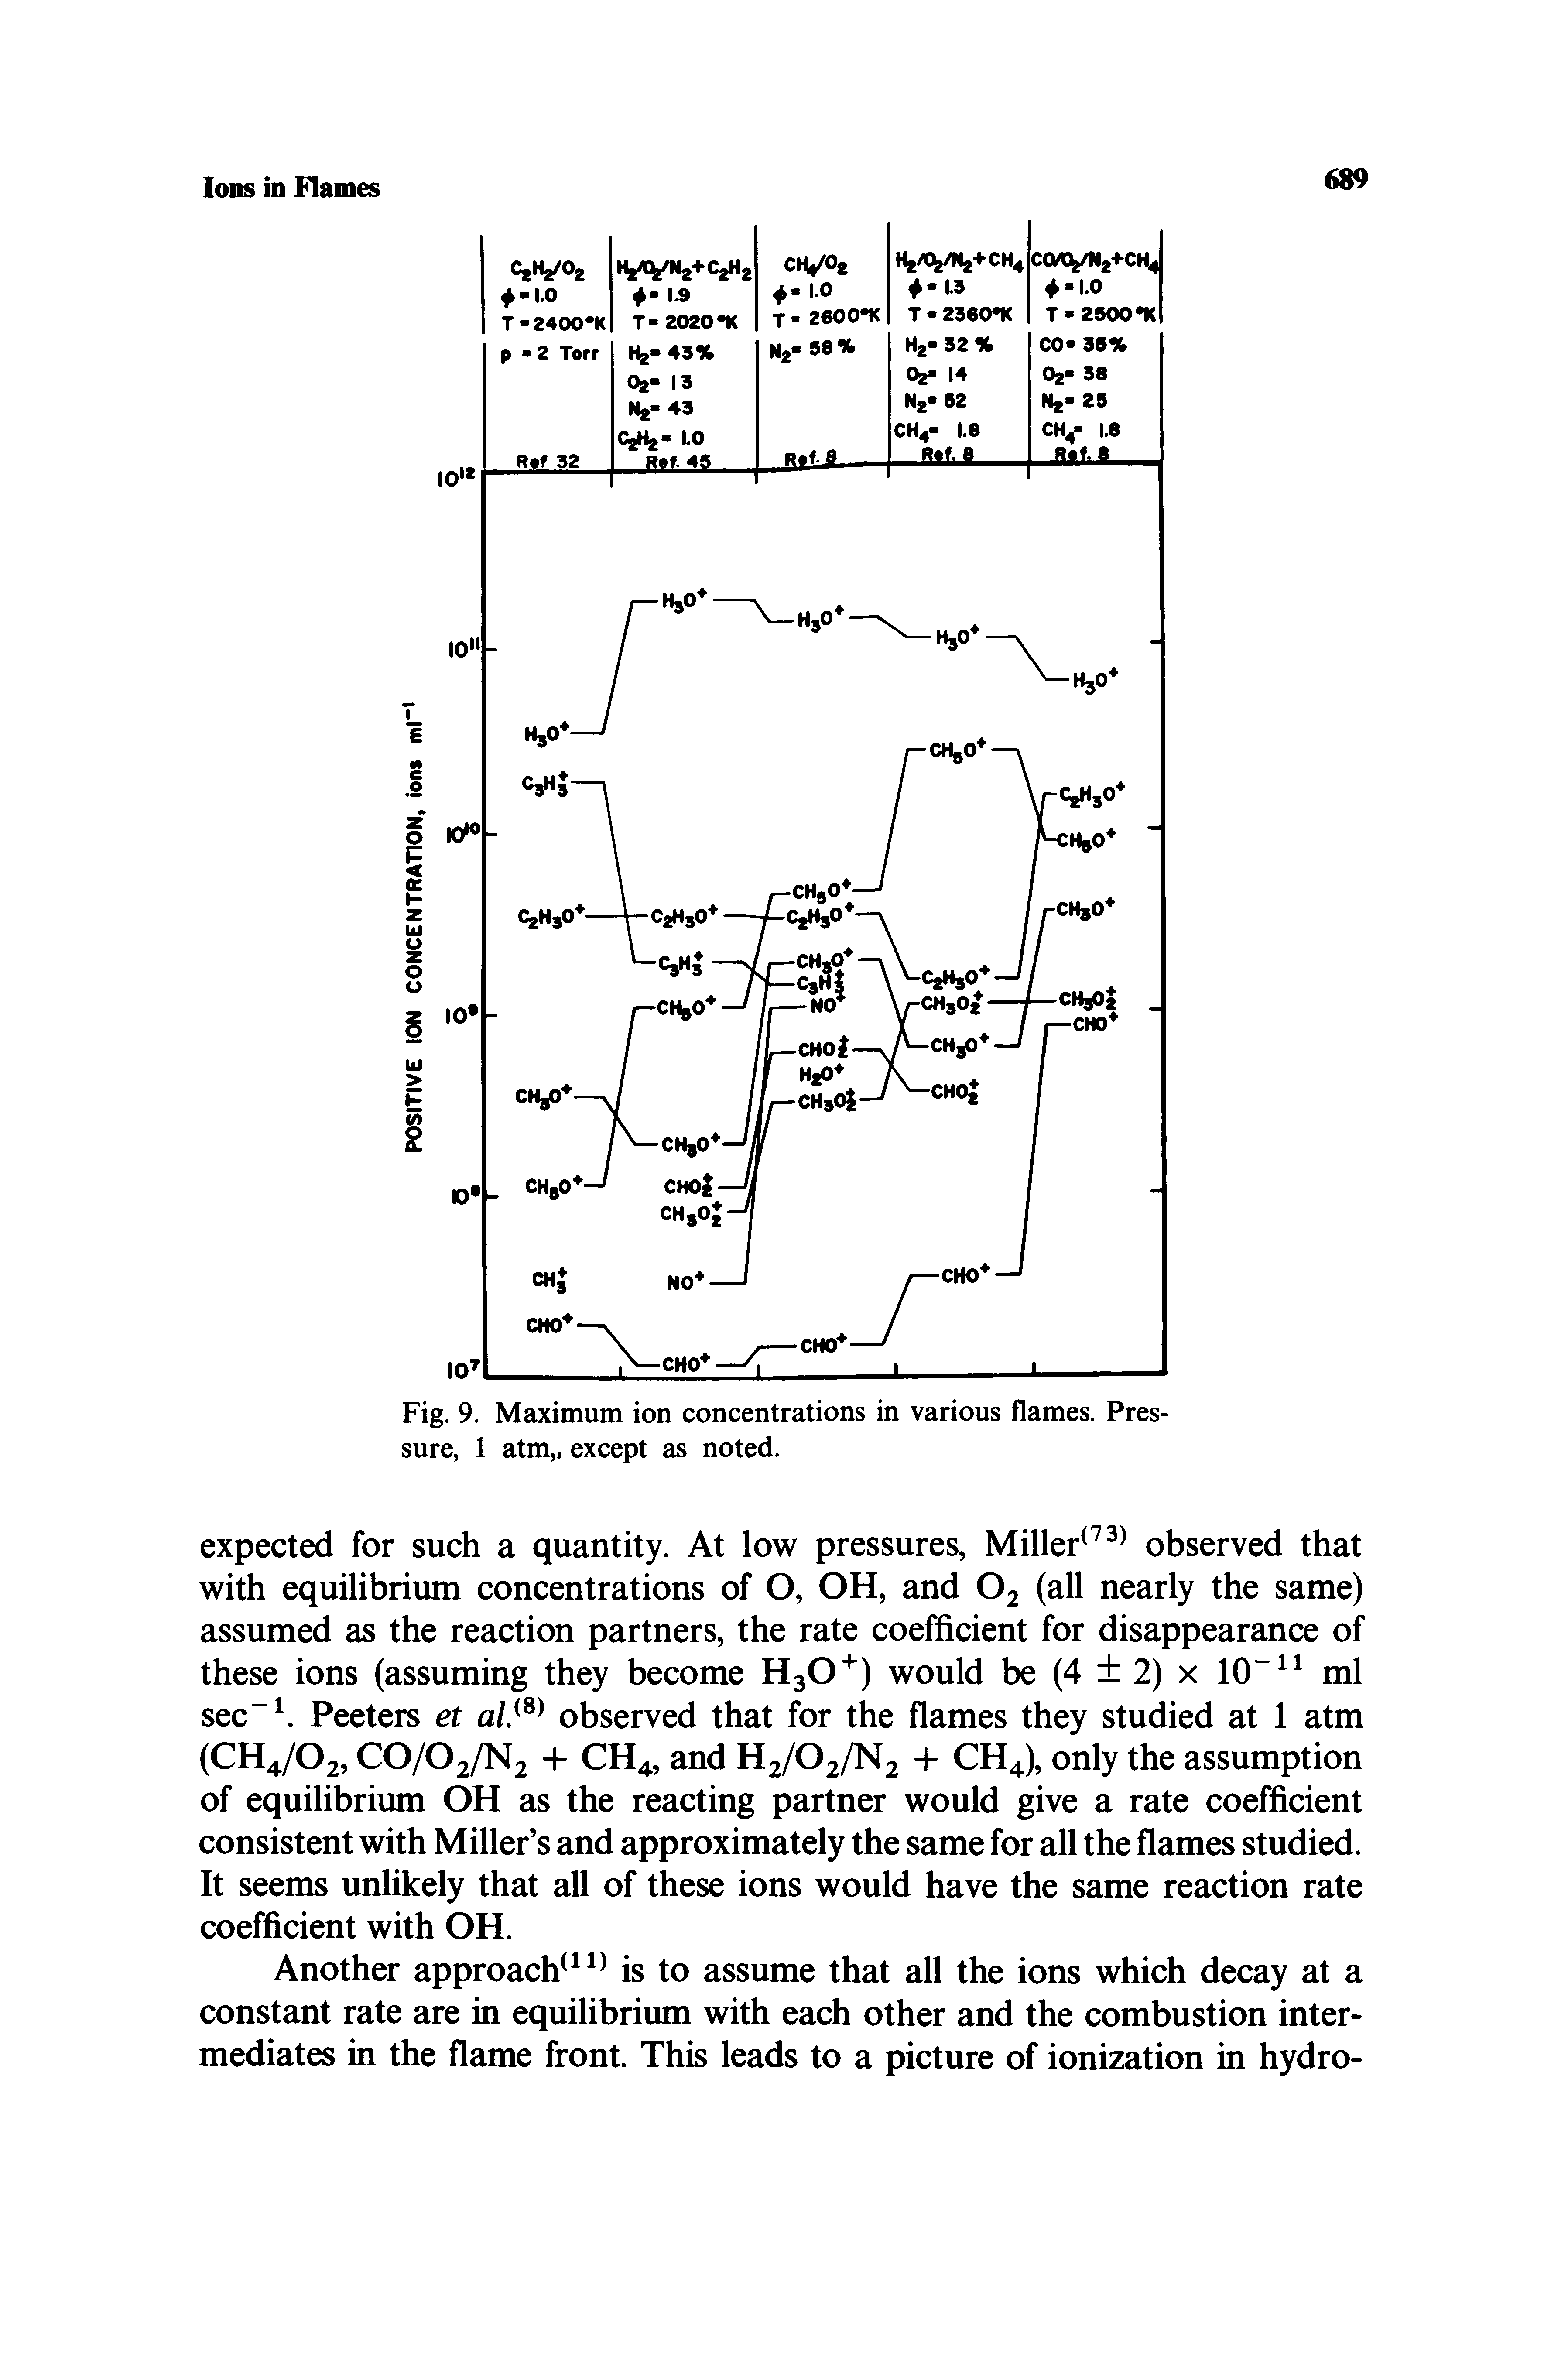 Fig. 9. Maximum ion concentrations in various flames. Pressure, 1 atm except as noted.